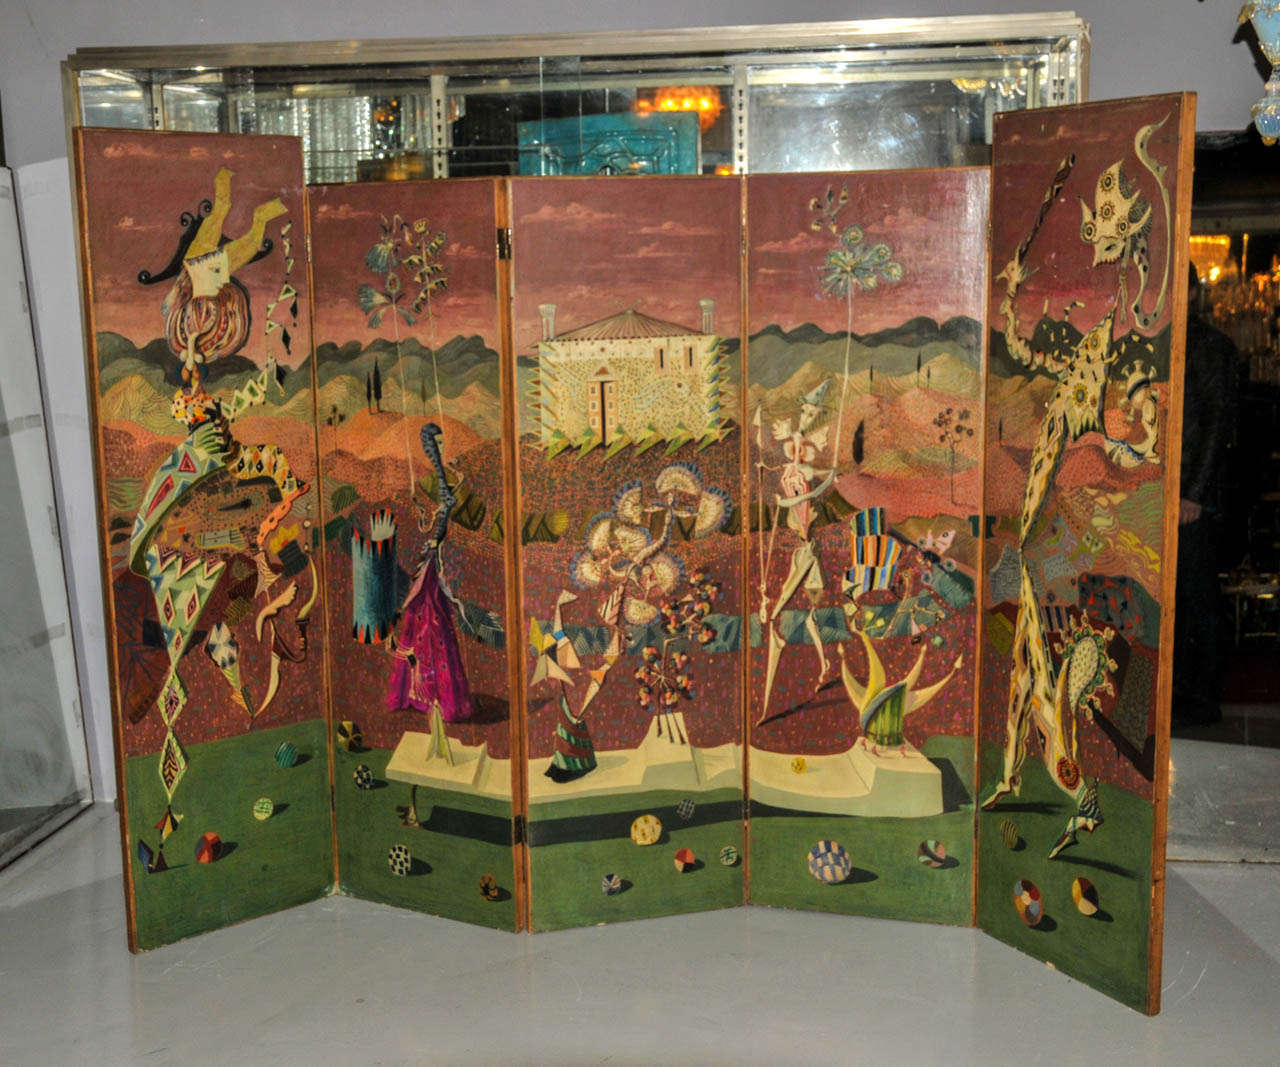 Large 1950's paitend surrealist screen. Five panels painted on one face. Wood painting by Bruno Capacci (1917-1996). Good condition. Normal wear consistent with age and use. 

Dimension :

Height: 160cm for 3 panels and 170cm for 2